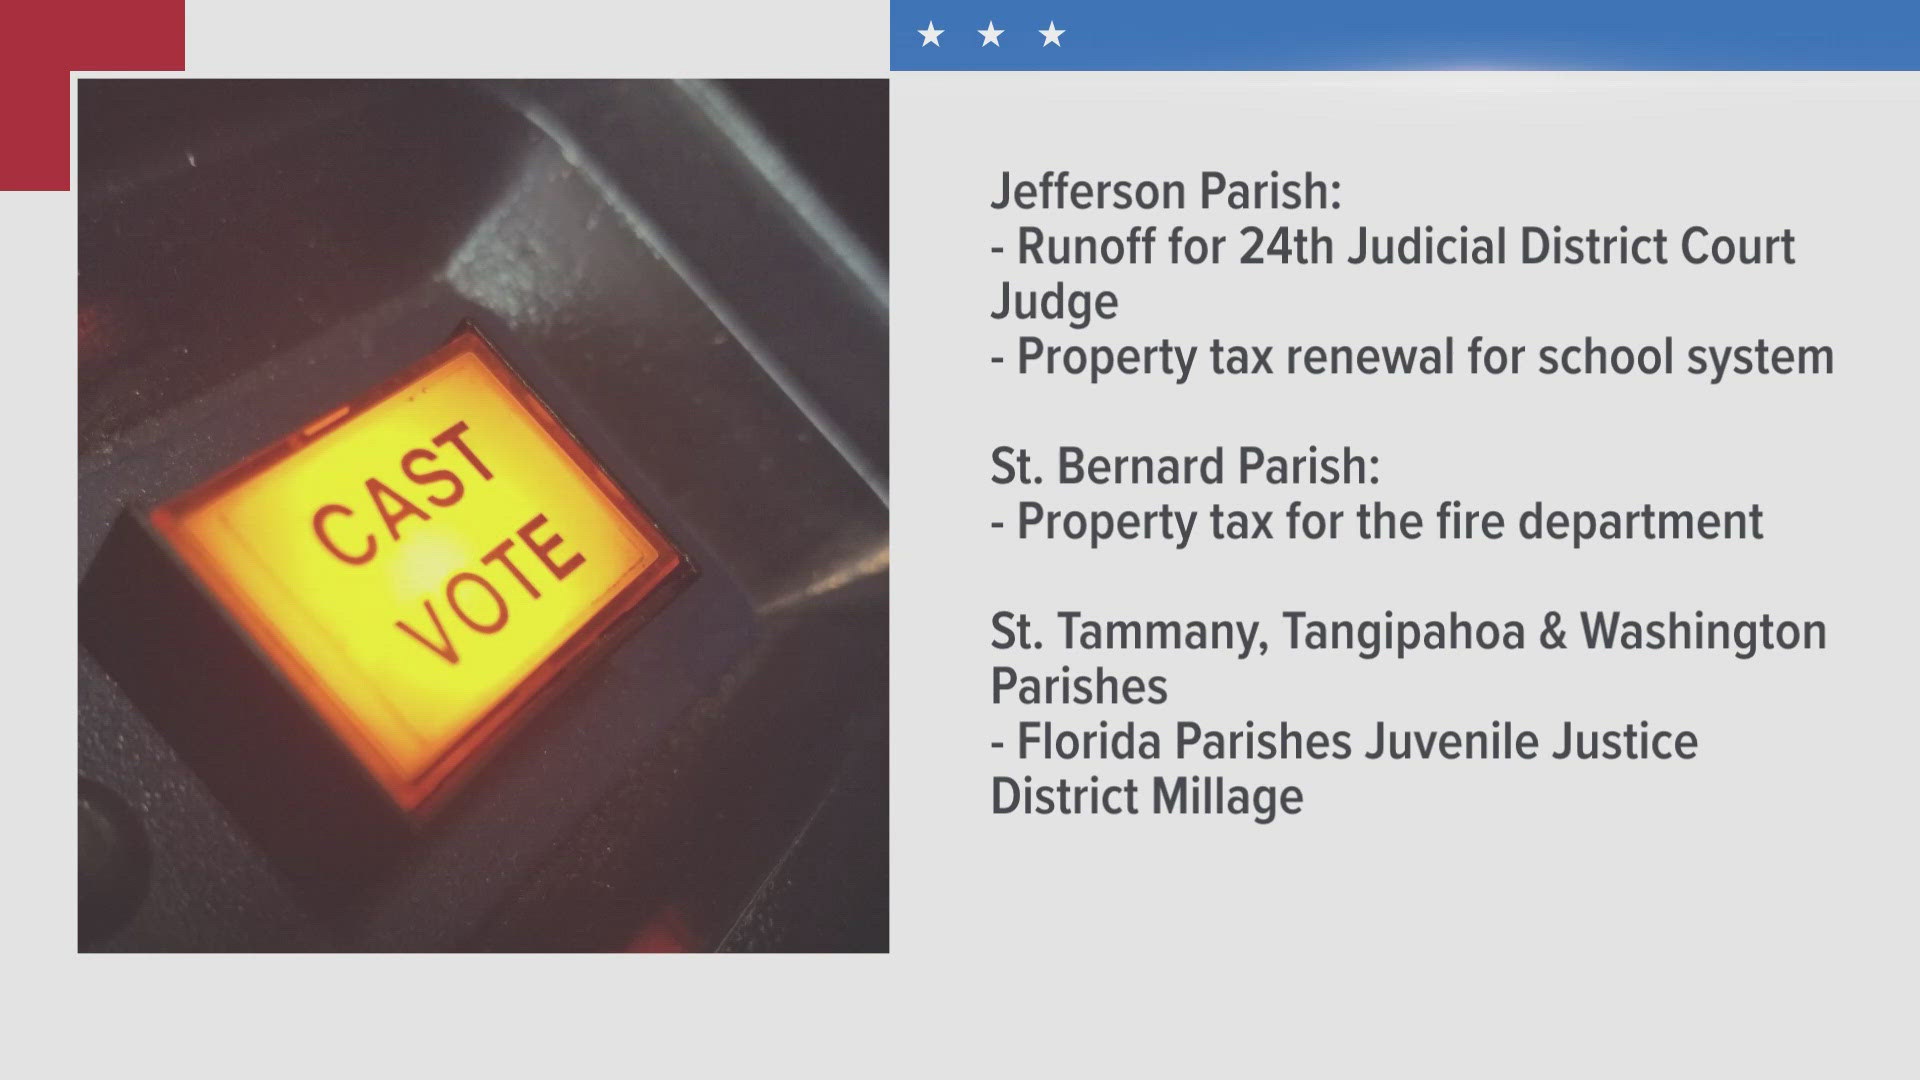 St. Tammany, St. Bernard and St. John, are among 45 parishes with proposals in Saturday's municipal election. Jefferson Parish has a competitive district judge race.